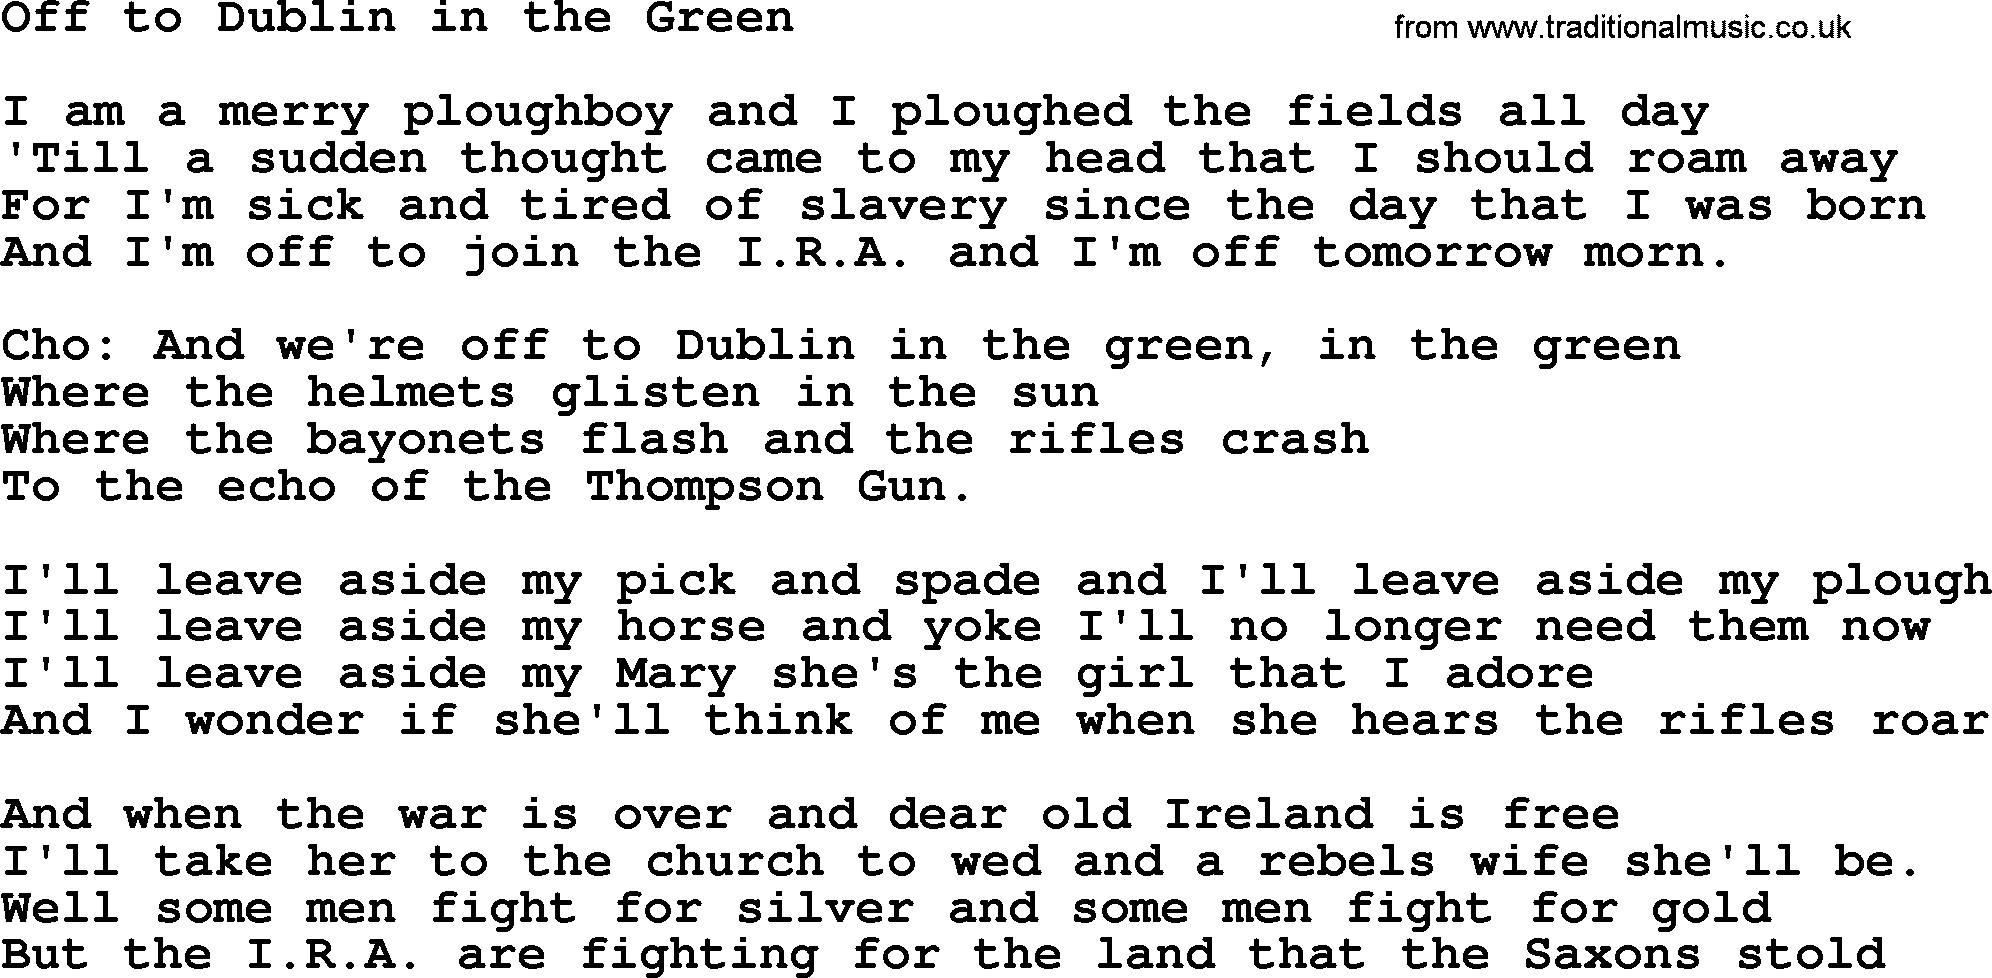 The Dubliners song: Off To Dublin In The Green, lyrics